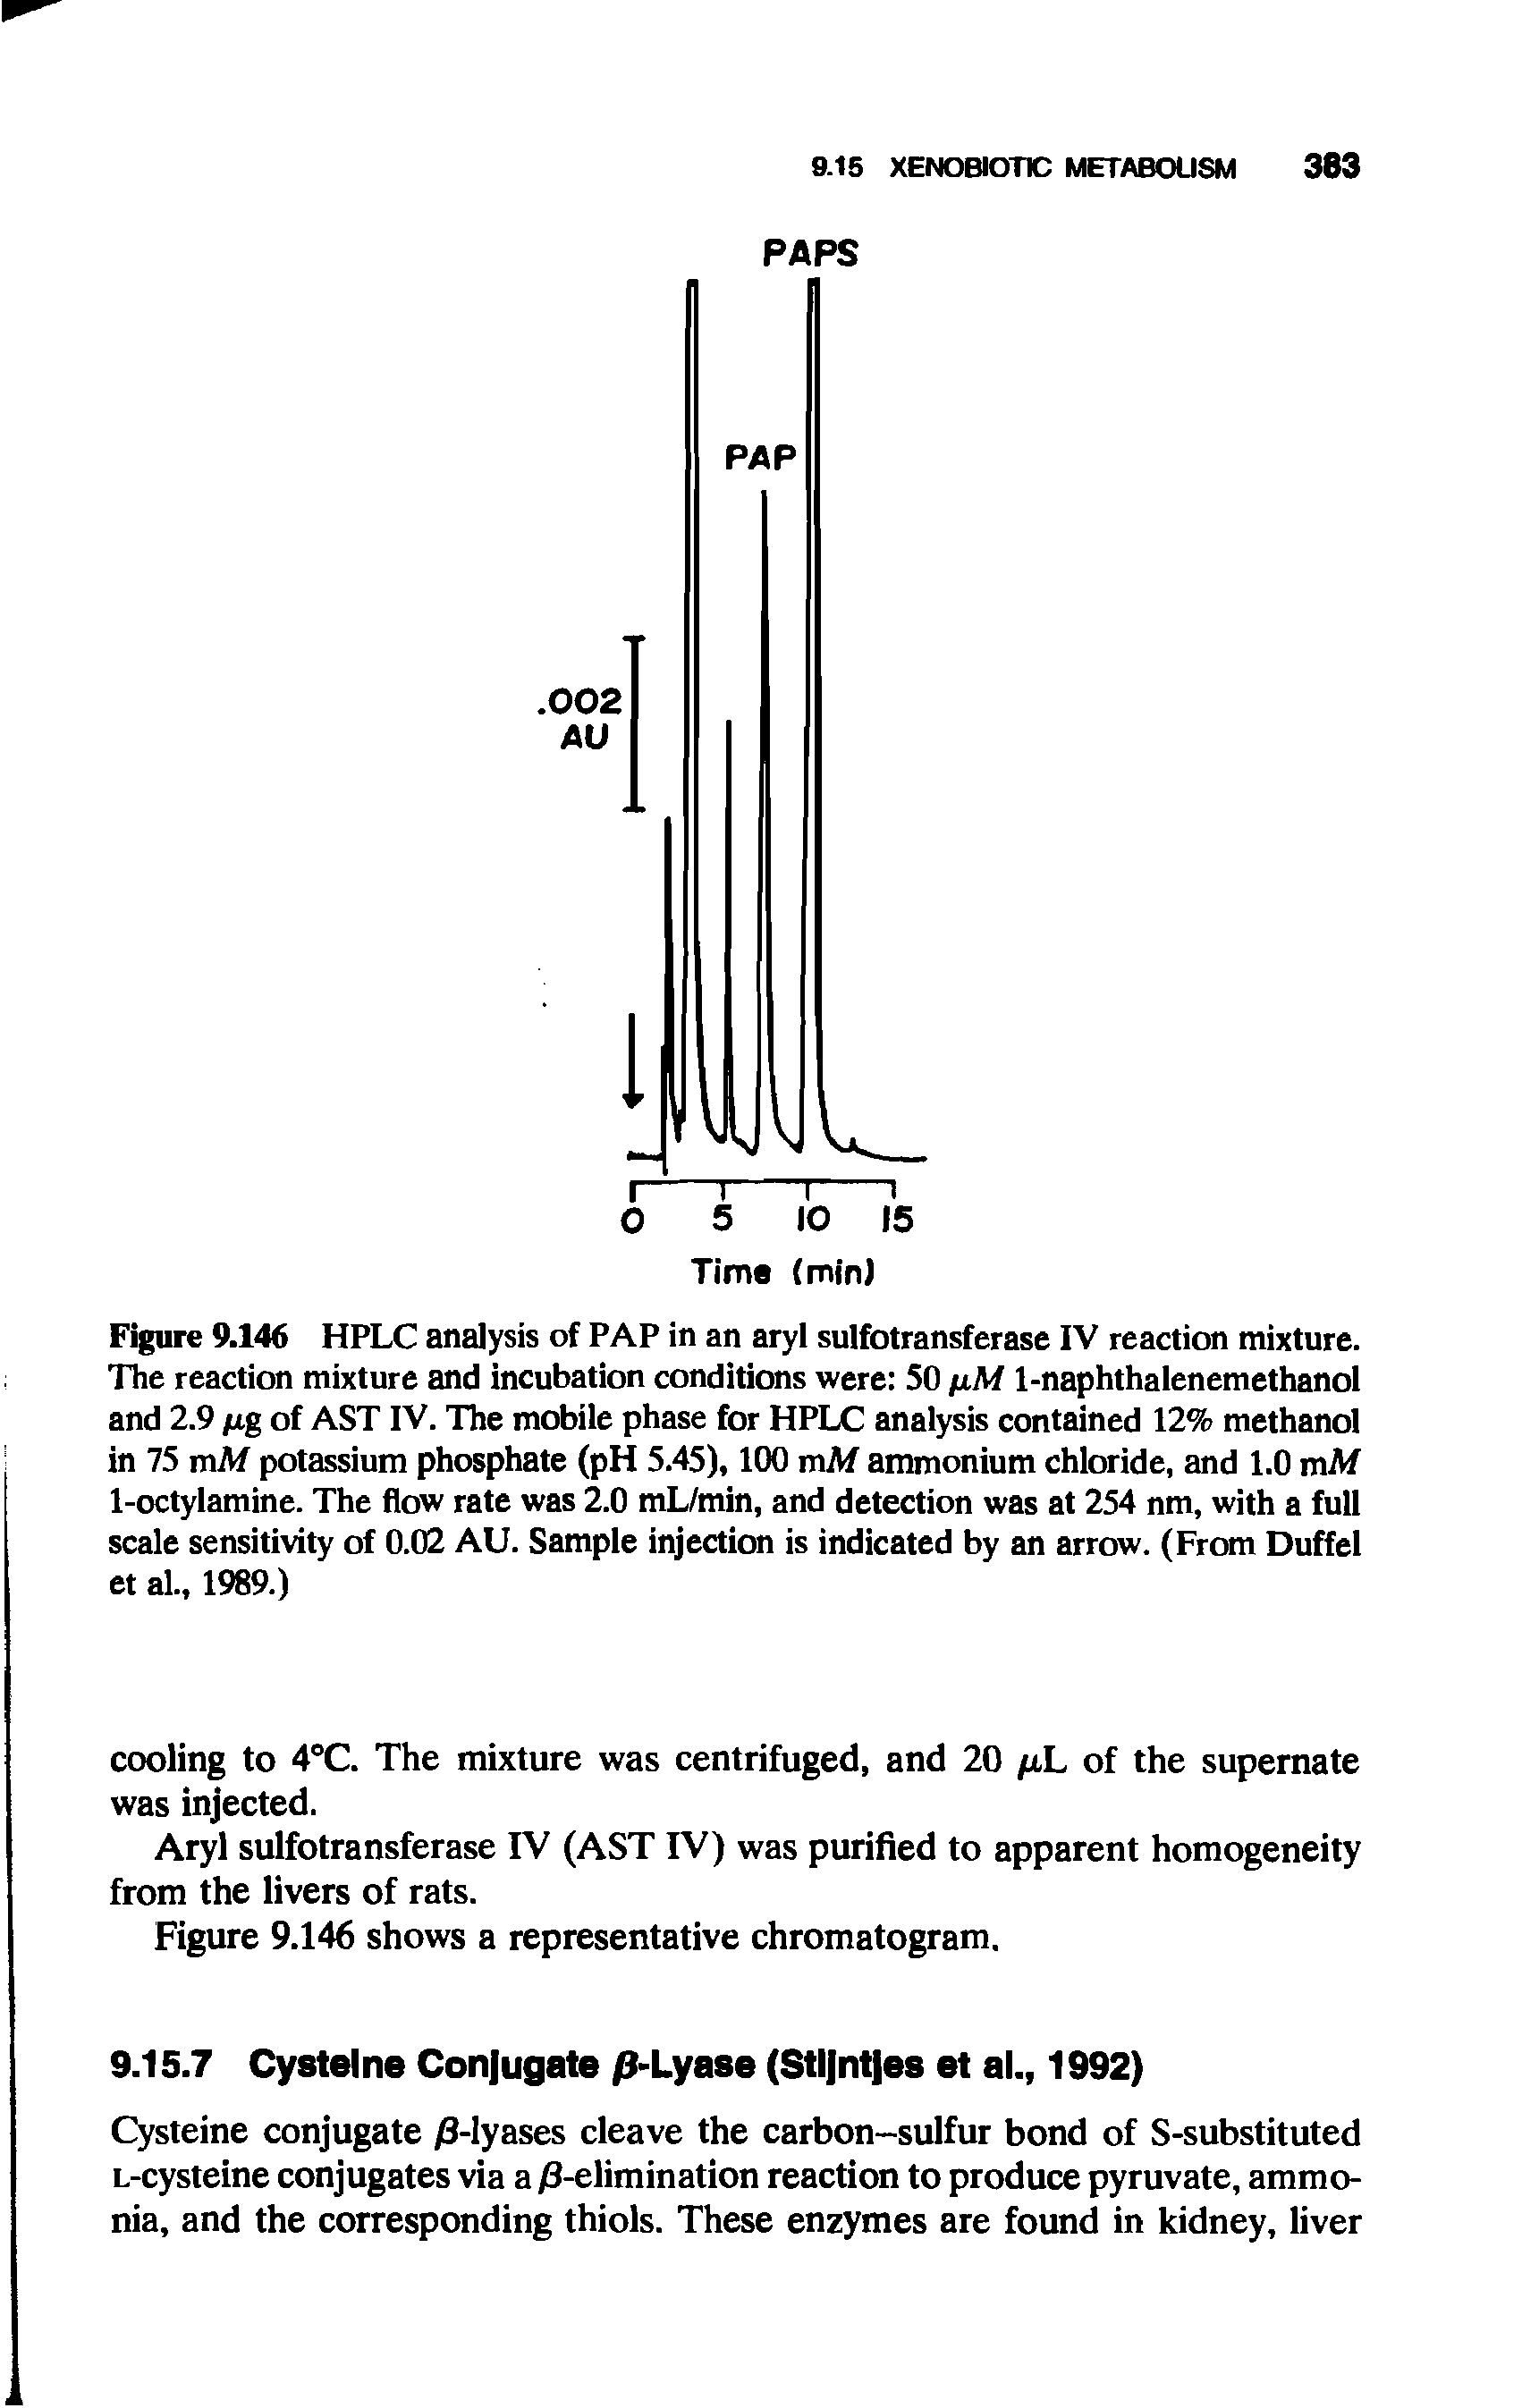 Figure 9.146 HPLC analysis of PAP in an aryl sulfotransferase IV reaction mixture. The reaction mixture and incubation conditions were 50 fiM 1-naphthalenemethanol and 2.9 fig of AST IV. The mobile phase for HPLC analysis contained 12% methanol in 75 mM potassium phosphate (pH 5.45), 100 mM ammonium chloride, and 1.0 mM 1-octylamine. The flow rate was 2.0 mL/min, and detection was at 254 nm, with a full scale sensitivity of 0.02 AU. Sample injection is indicated by an arrow. (From Duffel et al., 1989.)...